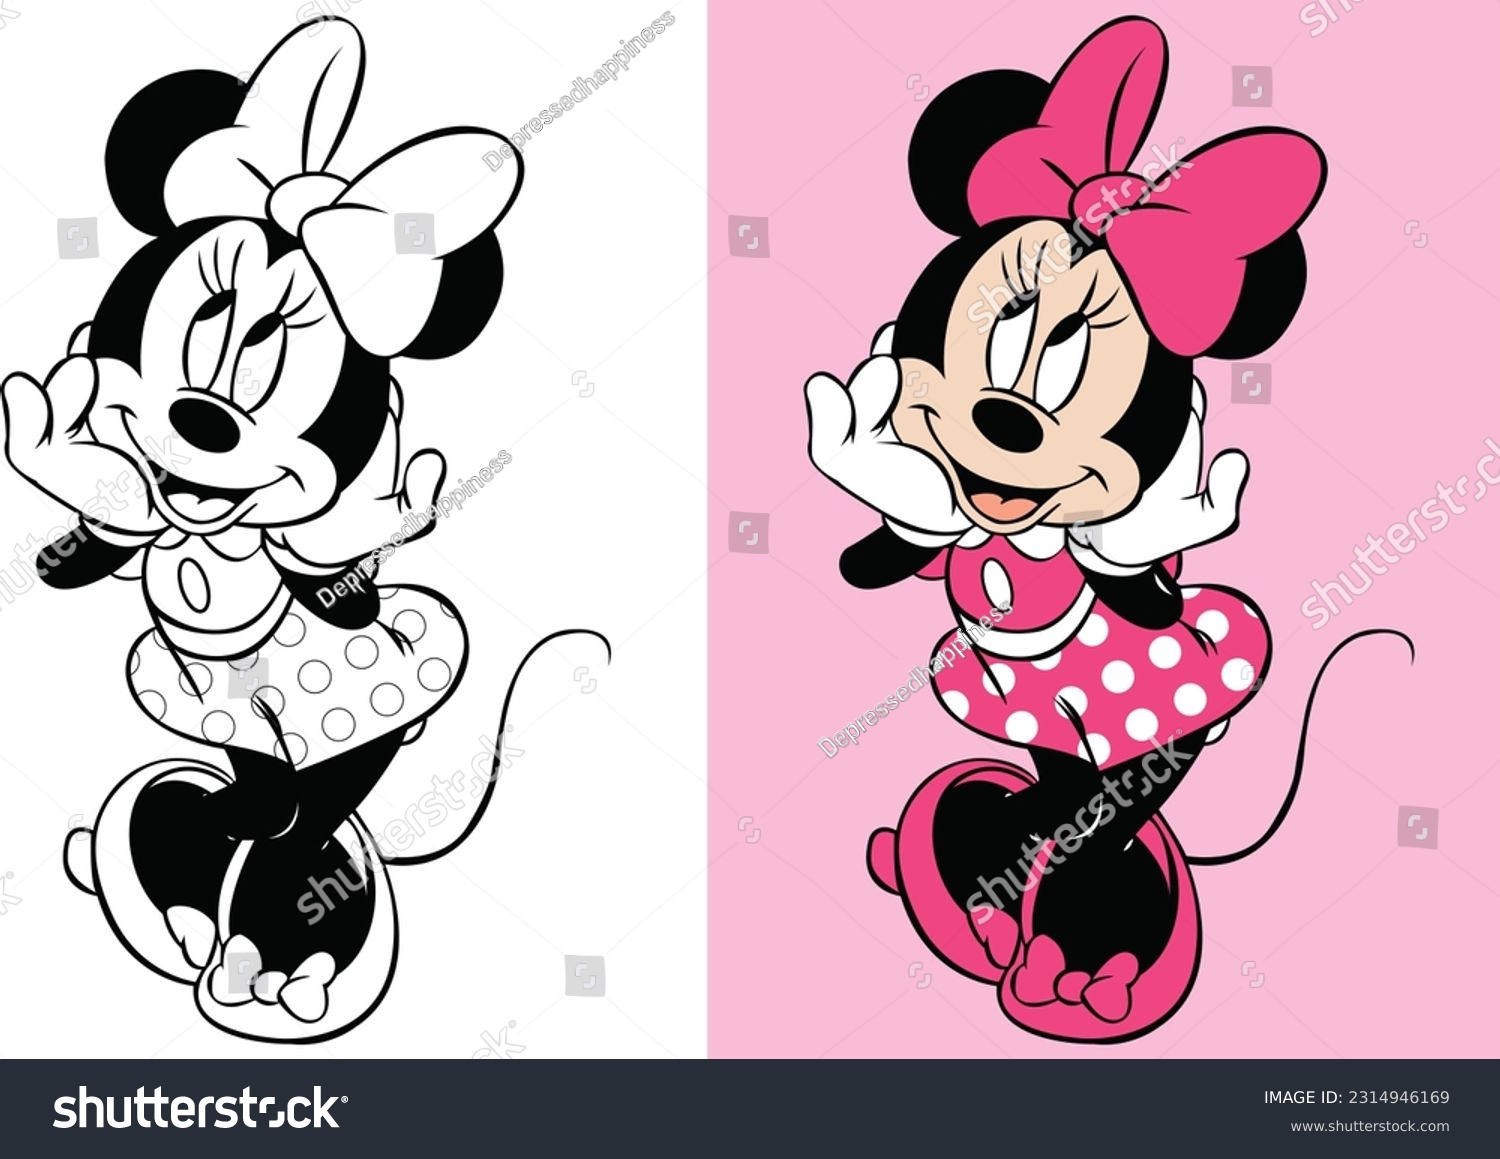 Minnie mouse images stock photos d objects vectors